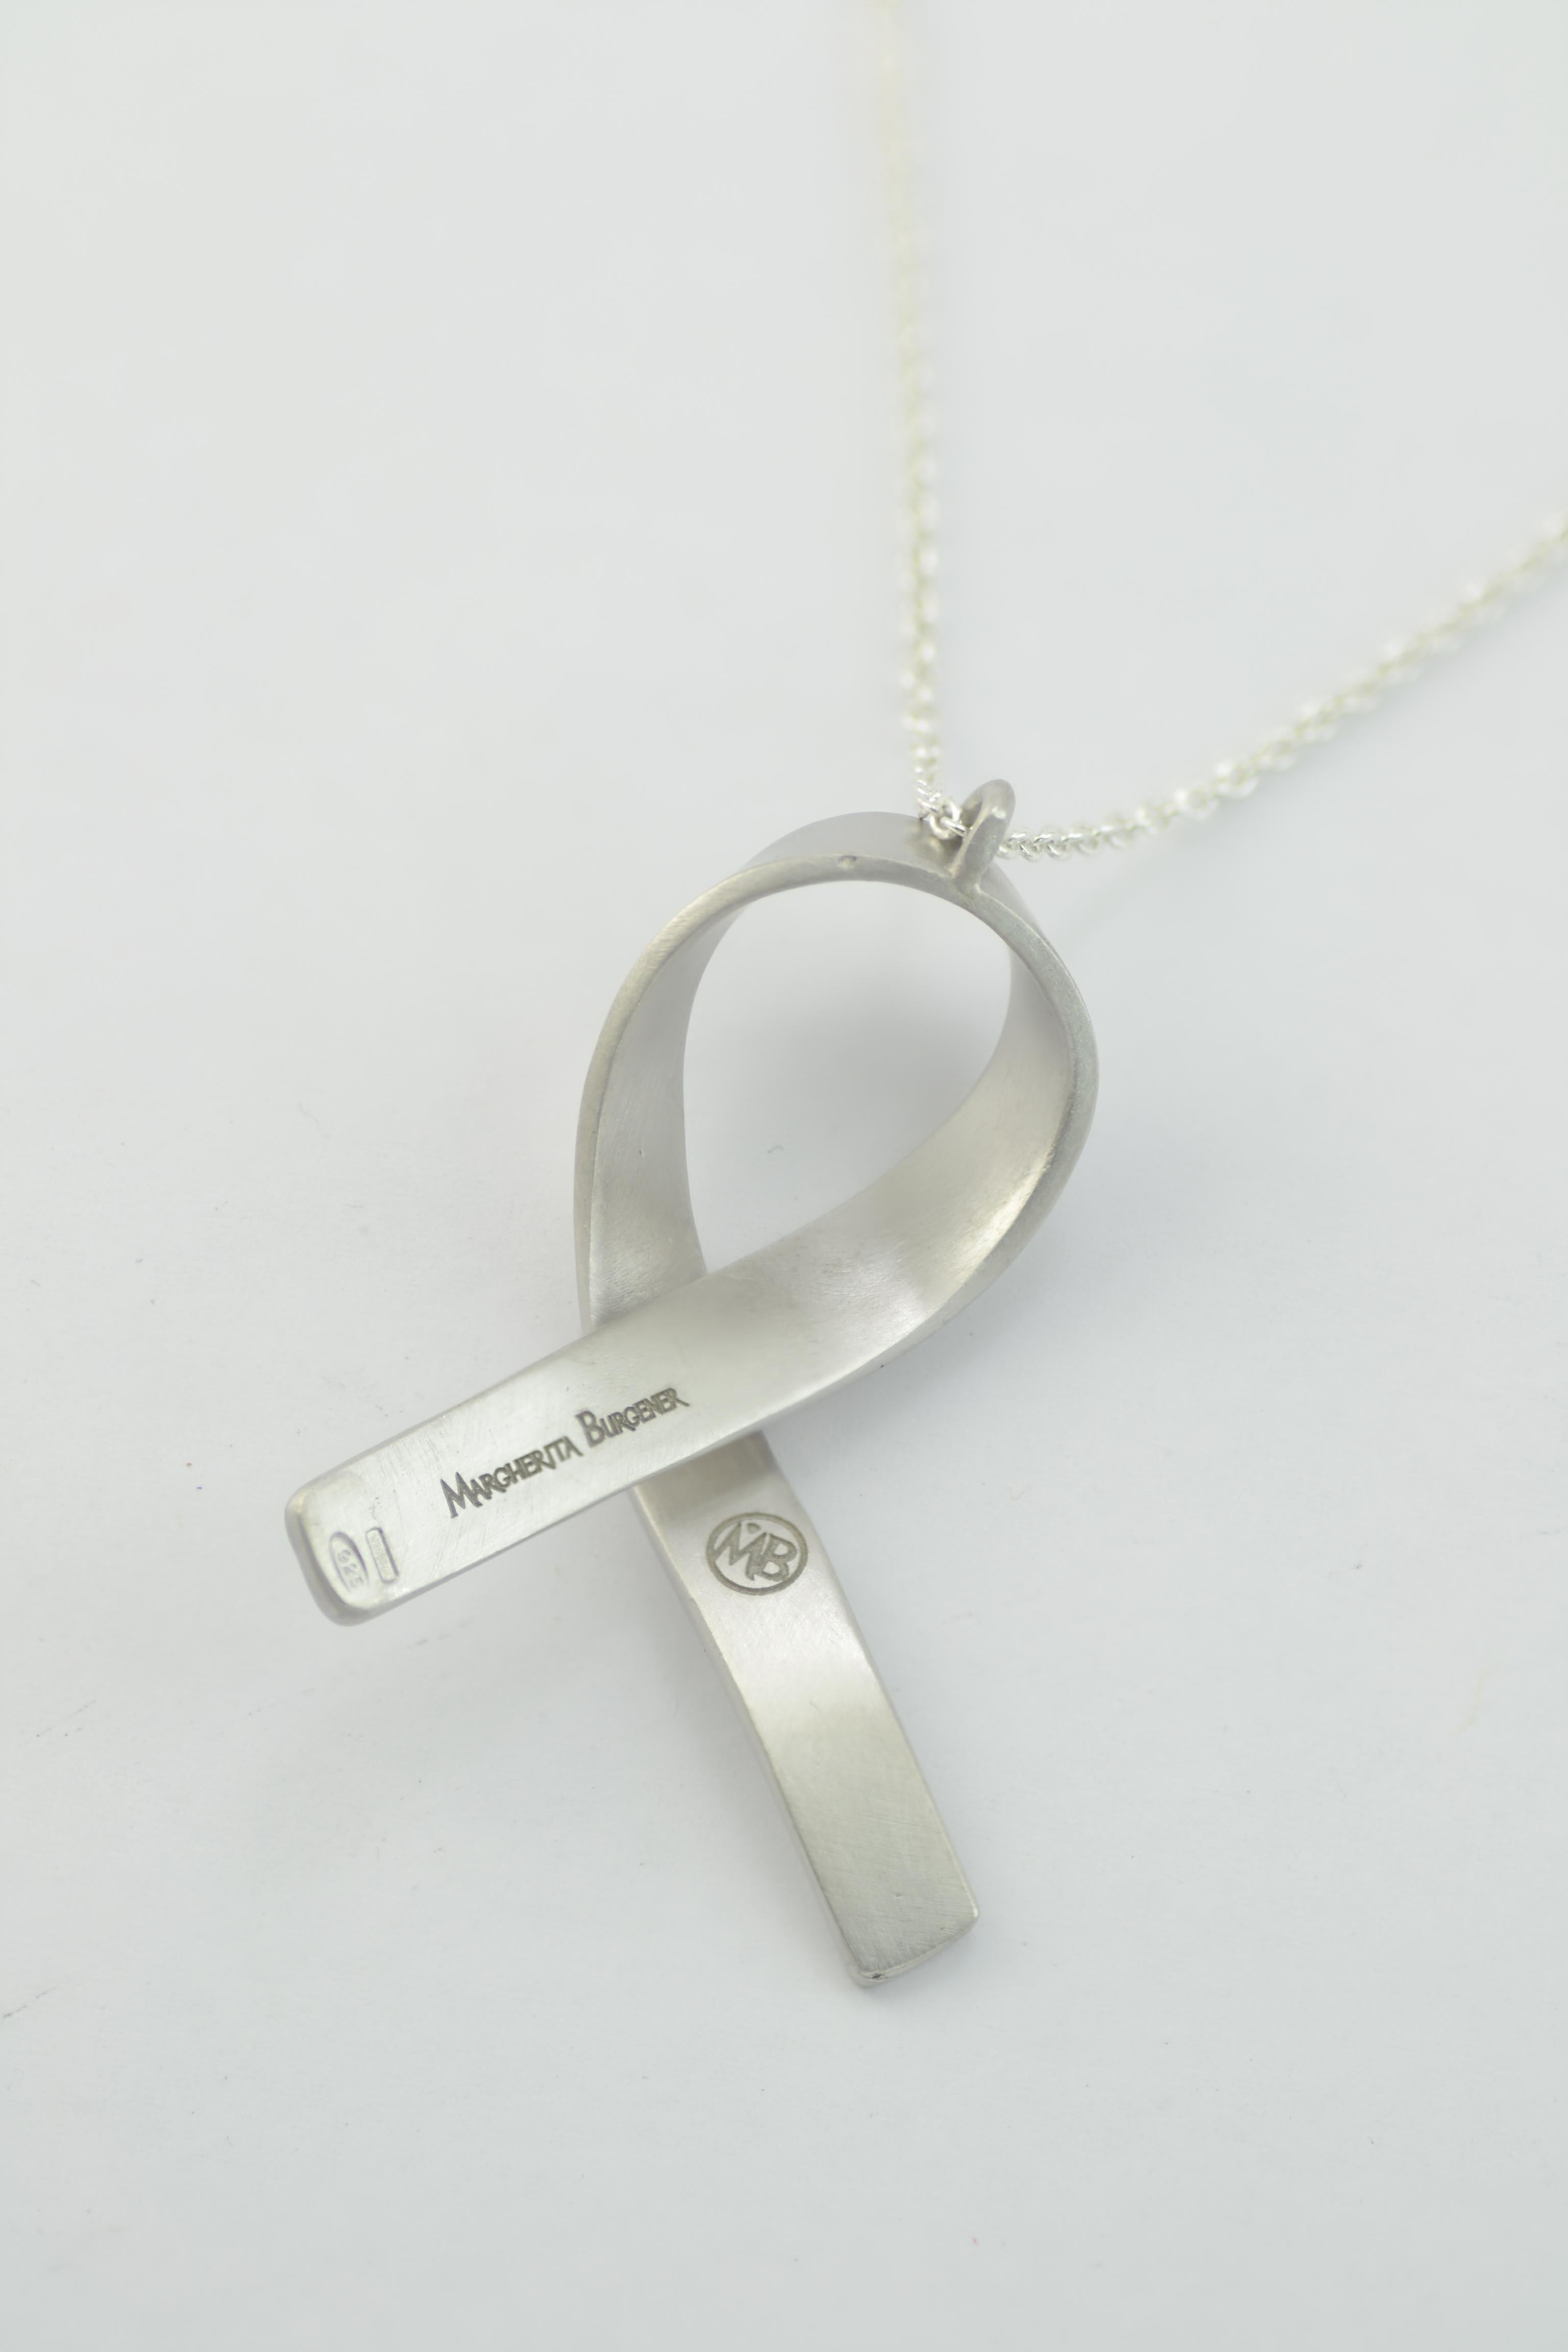 Margherita Burgener Handcrafted Silver Ribbon For Hope Necklace  3